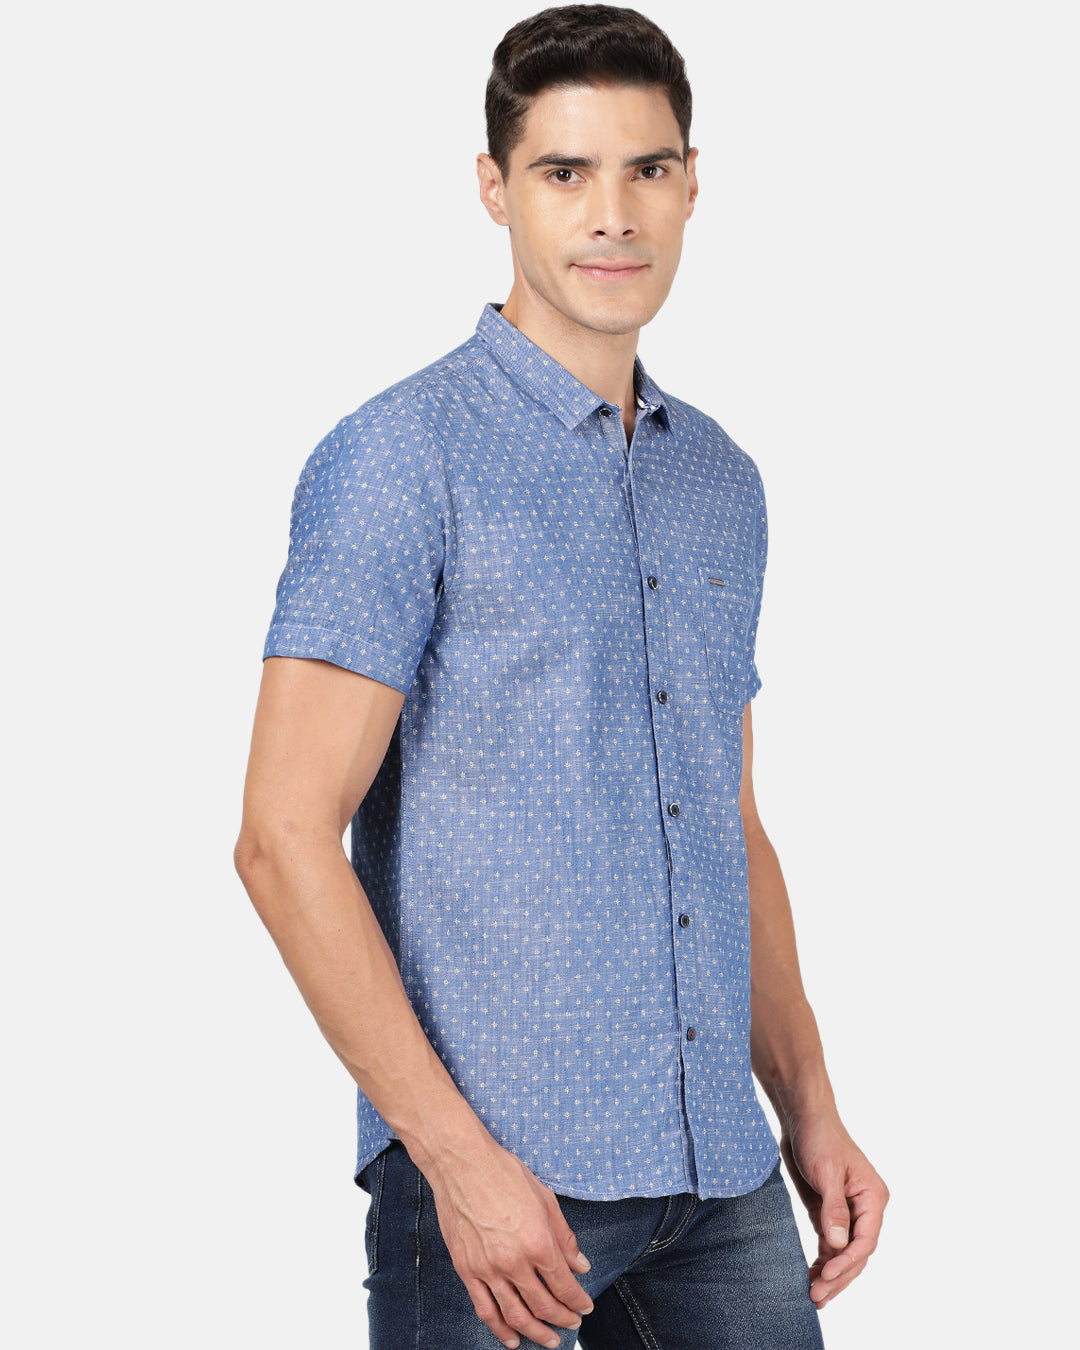 Crocodile Casual Half Sleeve Slim Fit Printed Blue with Collar Shirt for Men